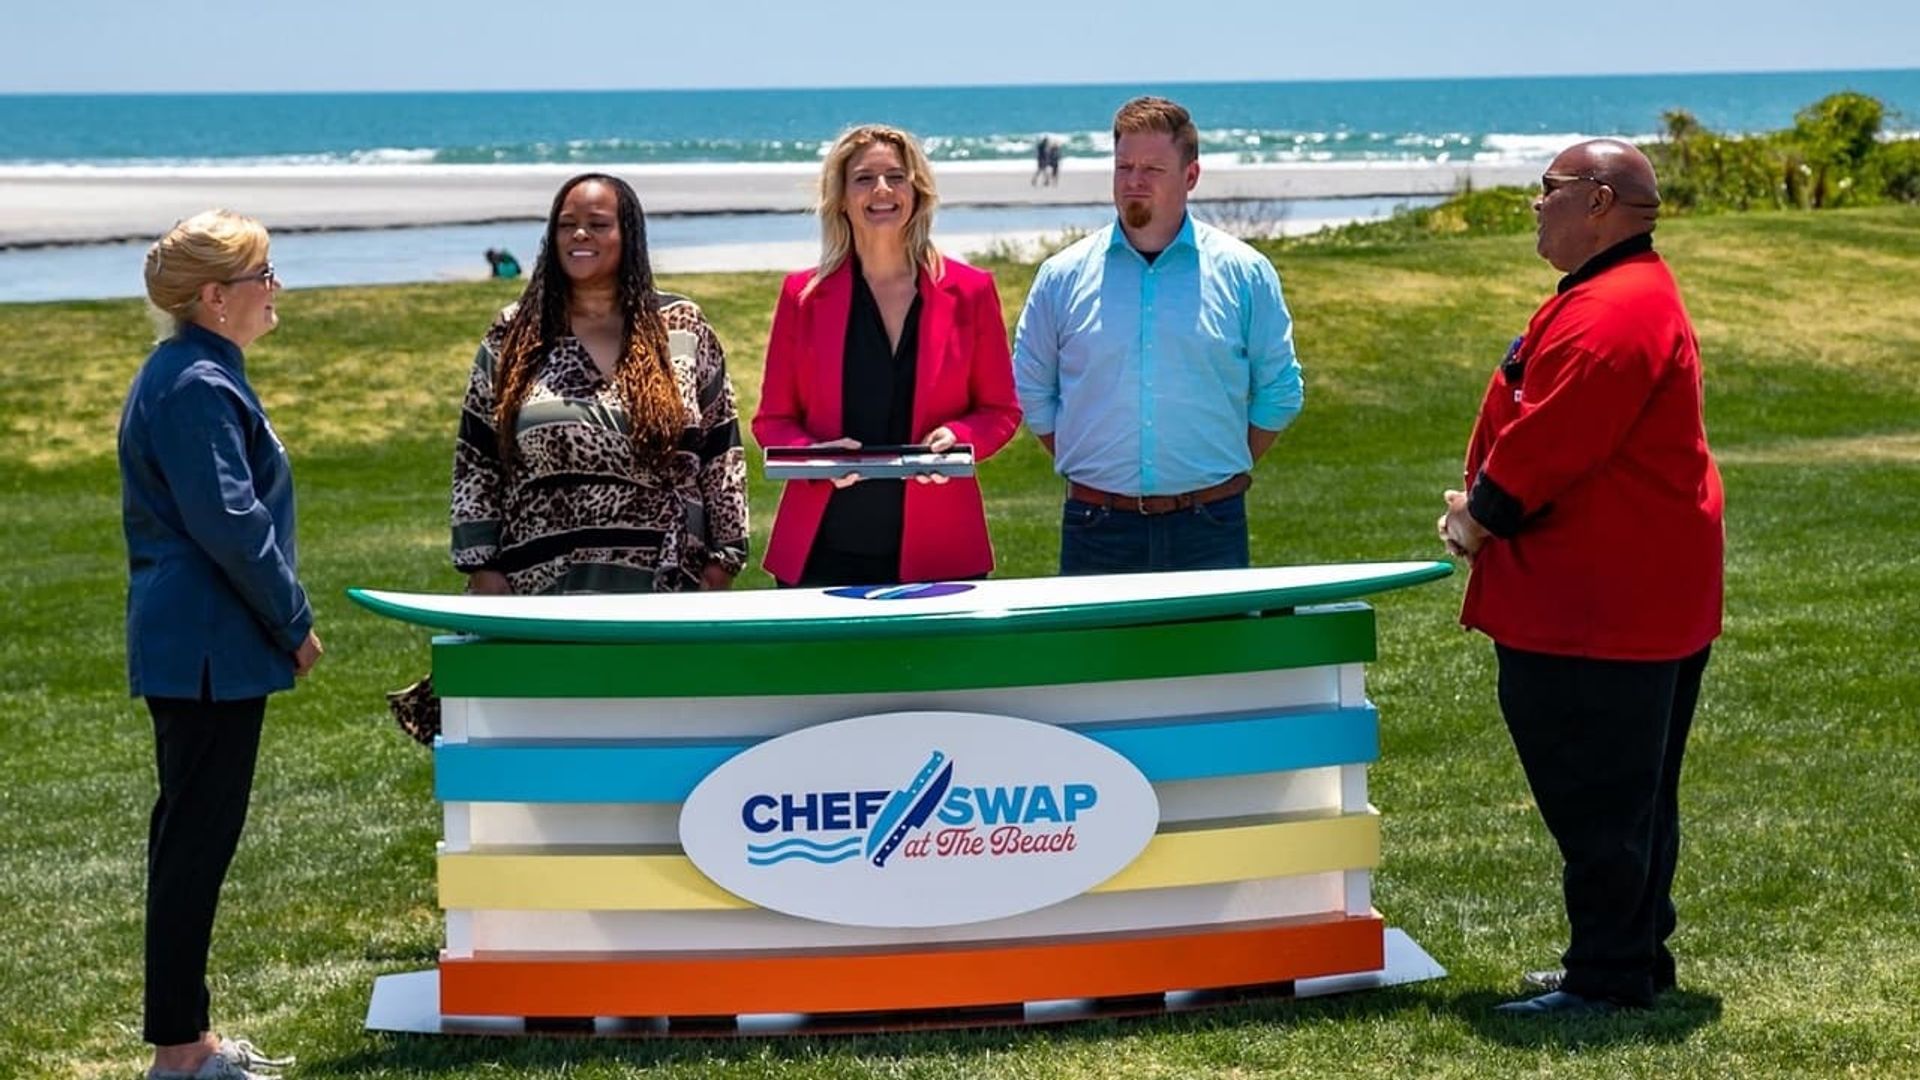 Chef Swap at the Beach background